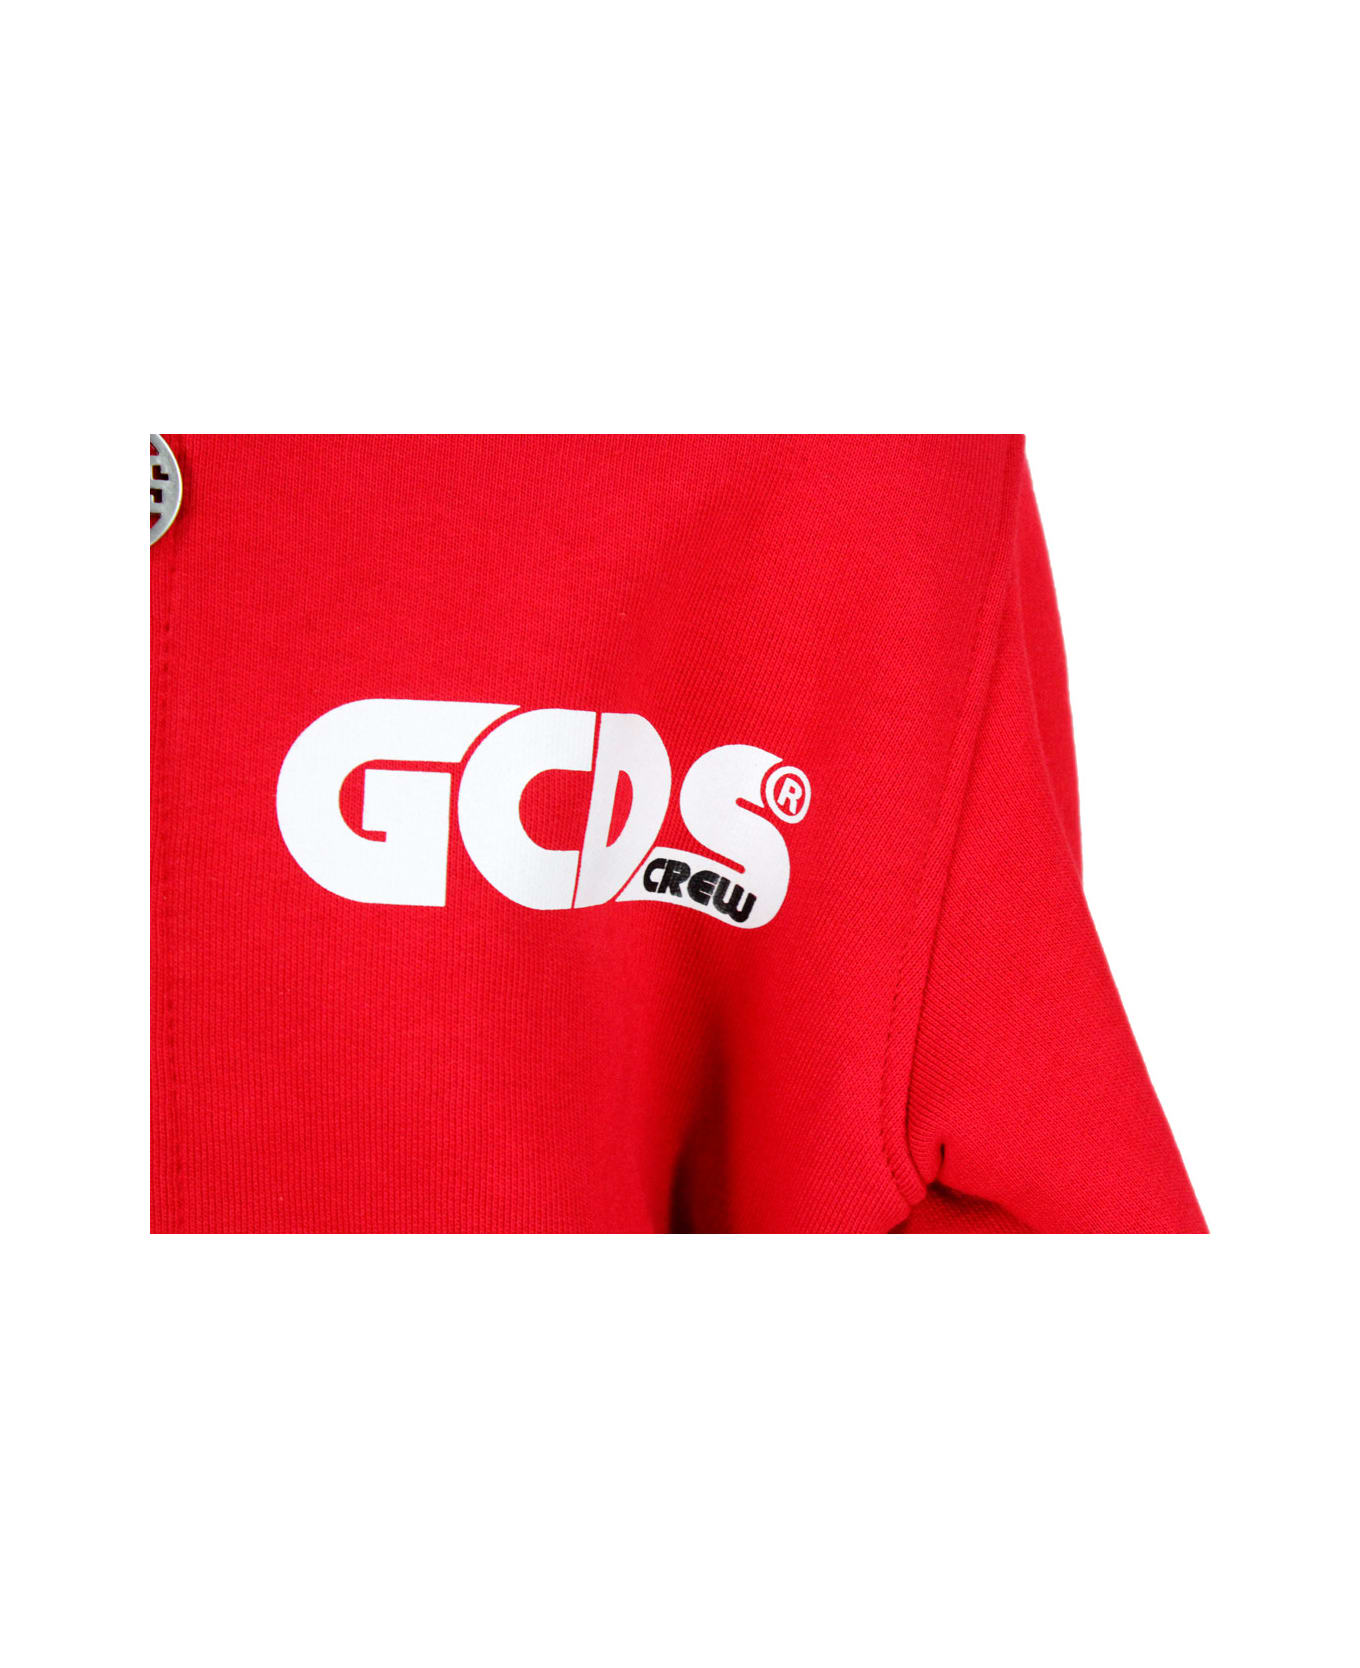 GCDS Cotton Sweatshirt With Zip And Hood With Logo Lettering On The Chest - Red